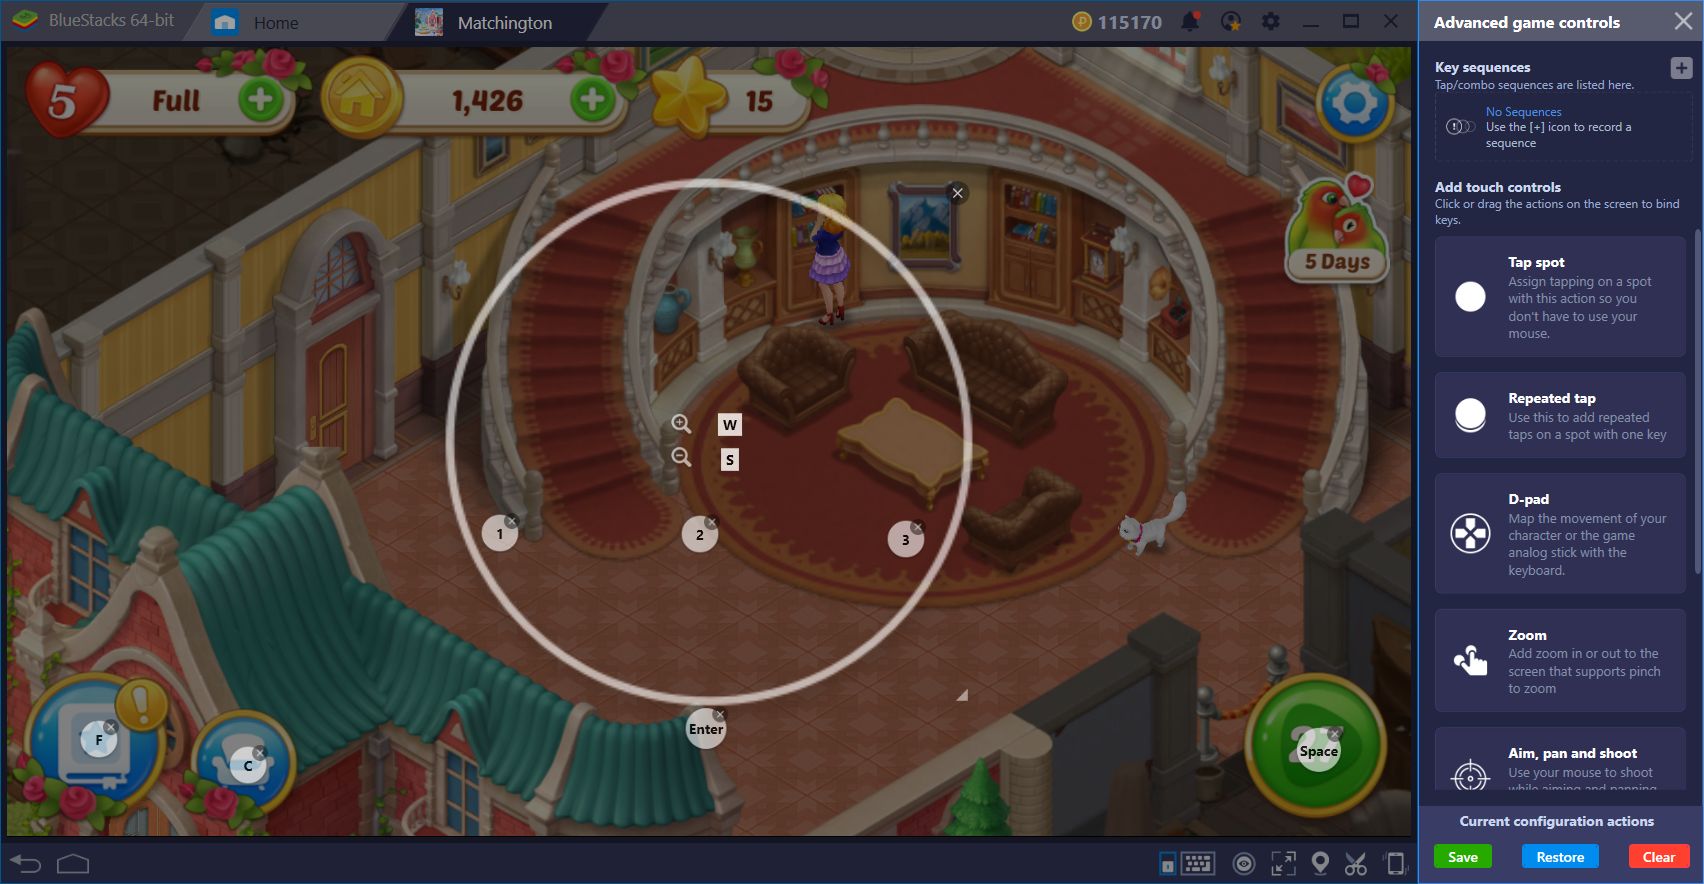 Combine Pillows and Blow Up the Boards in Matchington Mansion with BlueStacks